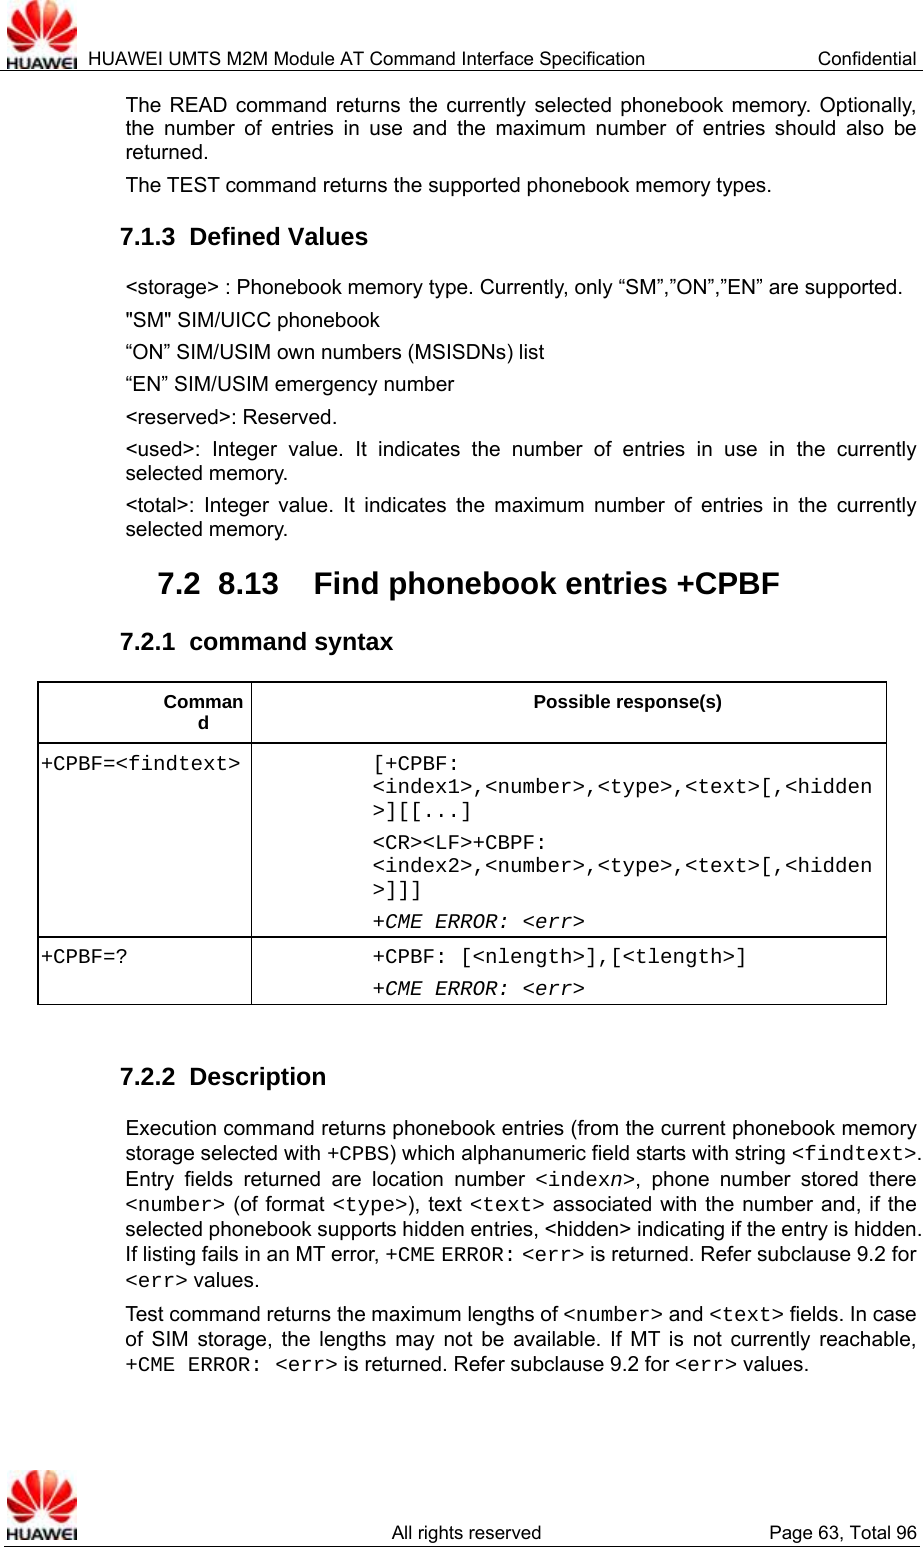  HUAWEI UMTS M2M Module AT Command Interface Specification  Confidential   All rights reserved  Page 63, Total 96 The READ command returns the currently selected phonebook memory. Optionally, the number of entries in use and the maximum number of entries should also be returned.  The TEST command returns the supported phonebook memory types.   7.1.3  Defined Values &lt;storage&gt; : Phonebook memory type. Currently, only “SM”,”ON”,”EN” are supported.   &quot;SM&quot; SIM/UICC phonebook “ON” SIM/USIM own numbers (MSISDNs) list “EN” SIM/USIM emergency number &lt;reserved&gt;: Reserved.   &lt;used&gt;: Integer value. It indicates the number of entries in use in the currently selected memory.   &lt;total&gt;: Integer value. It indicates the maximum number of entries in the currently selected memory.   7.2  8.13  Find phonebook entries +CPBF 7.2.1  command syntax Command Possible response(s) +CPBF=&lt;findtext&gt; [+CPBF: &lt;index1&gt;,&lt;number&gt;,&lt;type&gt;,&lt;text&gt;[,&lt;hidden&gt;][[...] &lt;CR&gt;&lt;LF&gt;+CBPF: &lt;index2&gt;,&lt;number&gt;,&lt;type&gt;,&lt;text&gt;[,&lt;hidden&gt;]]] +CME ERROR: &lt;err&gt; +CPBF=? +CPBF: [&lt;nlength&gt;],[&lt;tlength&gt;] +CME ERROR: &lt;err&gt;  7.2.2  Description Execution command returns phonebook entries (from the current phonebook memory storage selected with +CPBS) which alphanumeric field starts with string &lt;findtext&gt;. Entry fields returned are location number &lt;indexn&gt;, phone number stored there &lt;number&gt; (of format &lt;type&gt;), text &lt;text&gt; associated with the number and, if the selected phonebook supports hidden entries, &lt;hidden&gt; indicating if the entry is hidden. If listing fails in an MT error, +CME ERROR: &lt;err&gt; is returned. Refer subclause 9.2 for &lt;err&gt; values. Test command returns the maximum lengths of &lt;number&gt; and &lt;text&gt; fields. In case of SIM storage, the lengths may not be available. If MT is not currently reachable, +CME ERROR: &lt;err&gt; is returned. Refer subclause 9.2 for &lt;err&gt; values.  